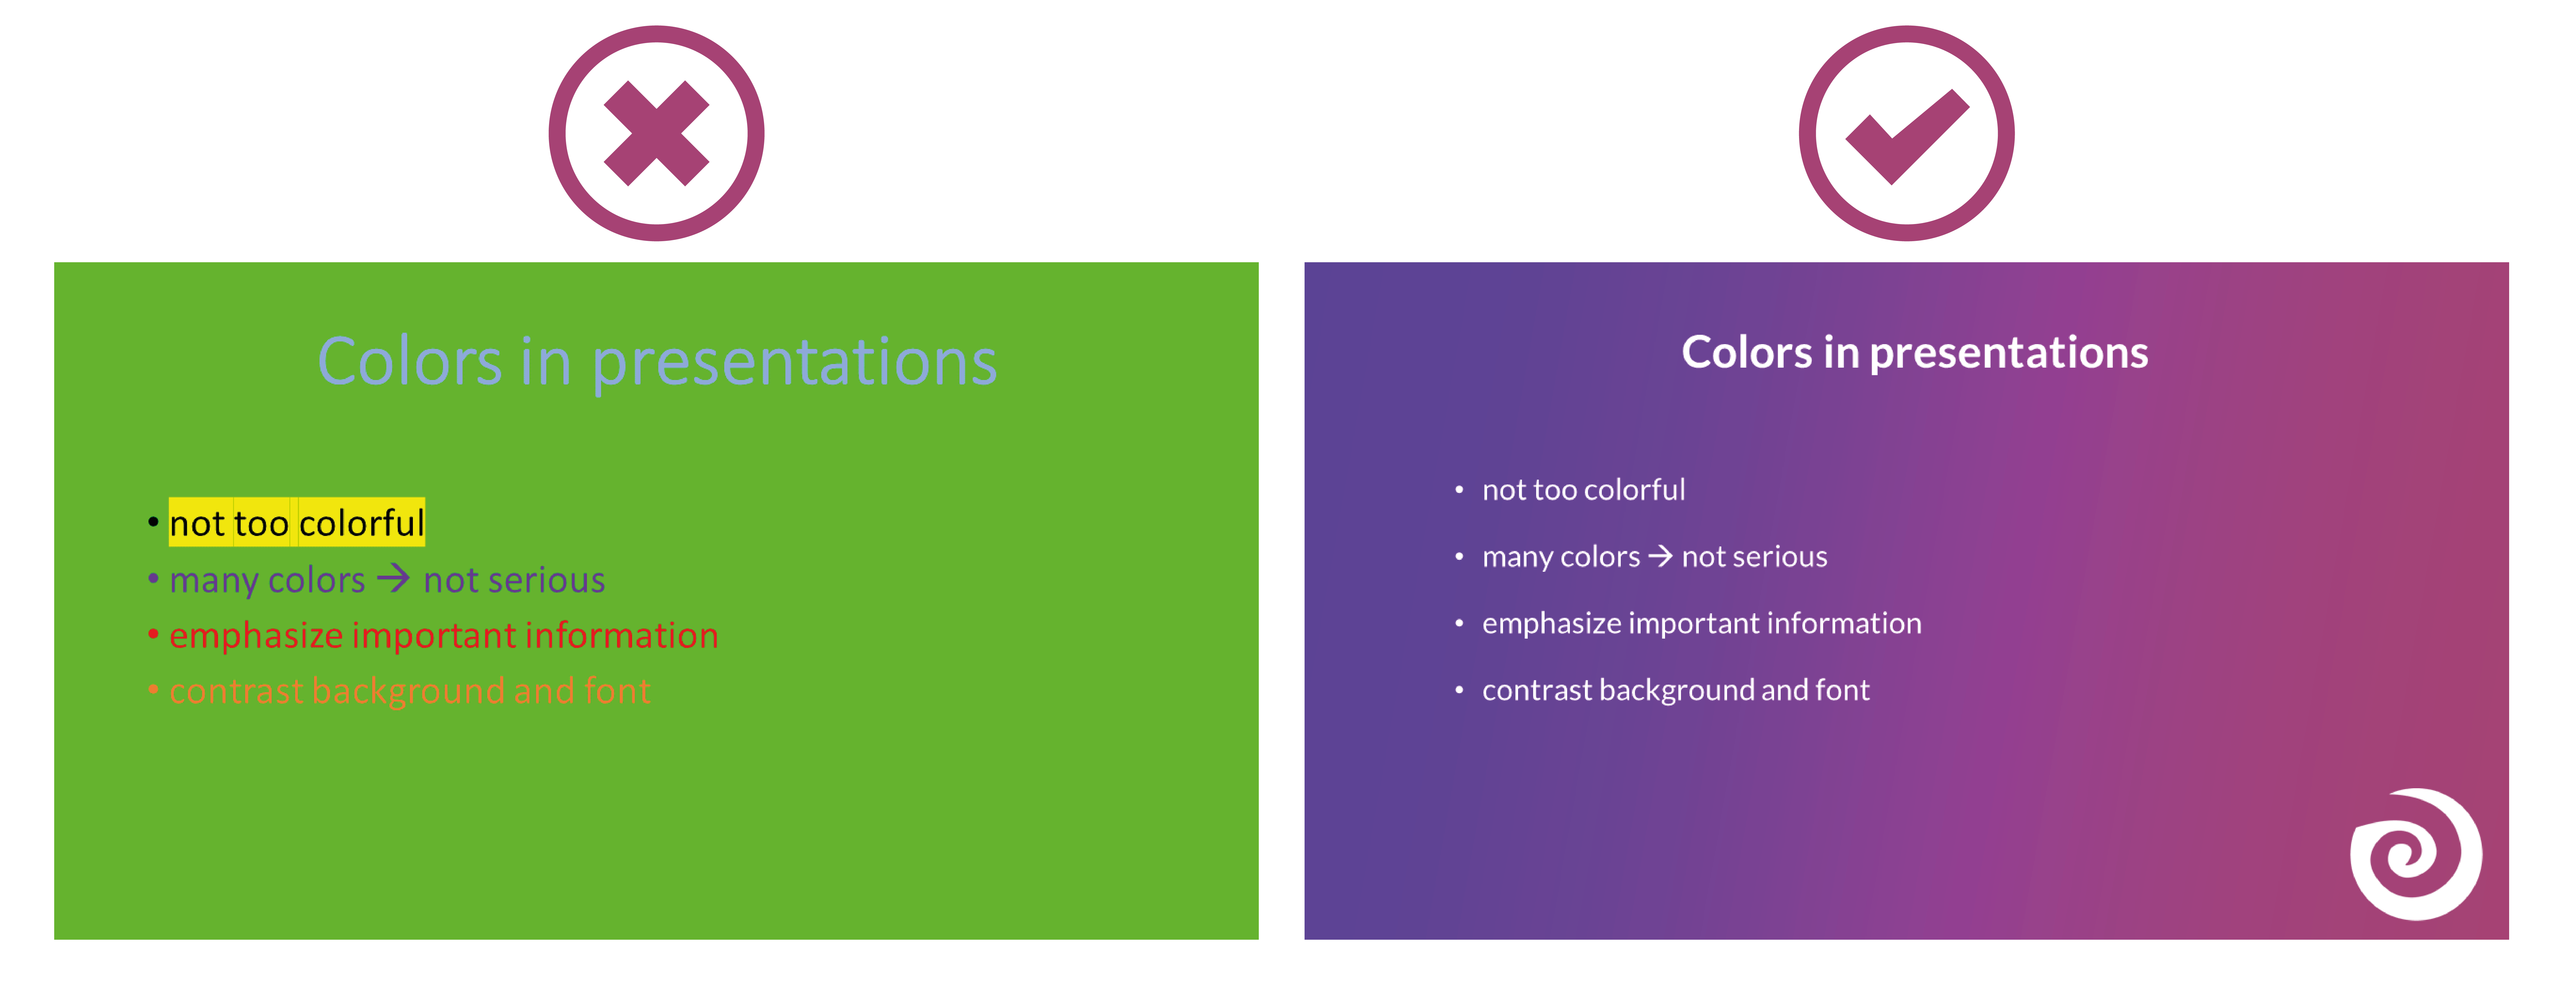 presentation colors to avoid